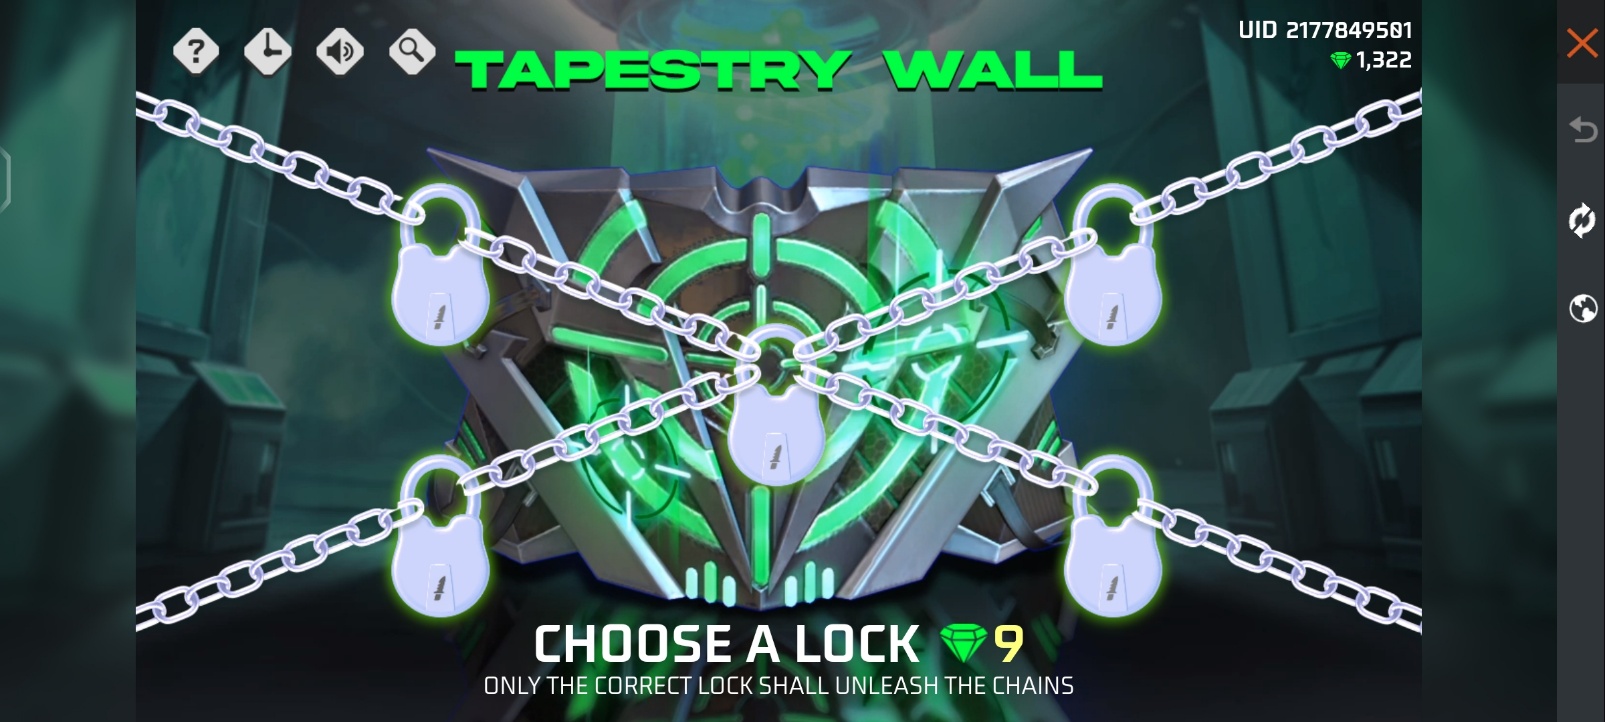 New Event In Free Fire : Tapestry Wall